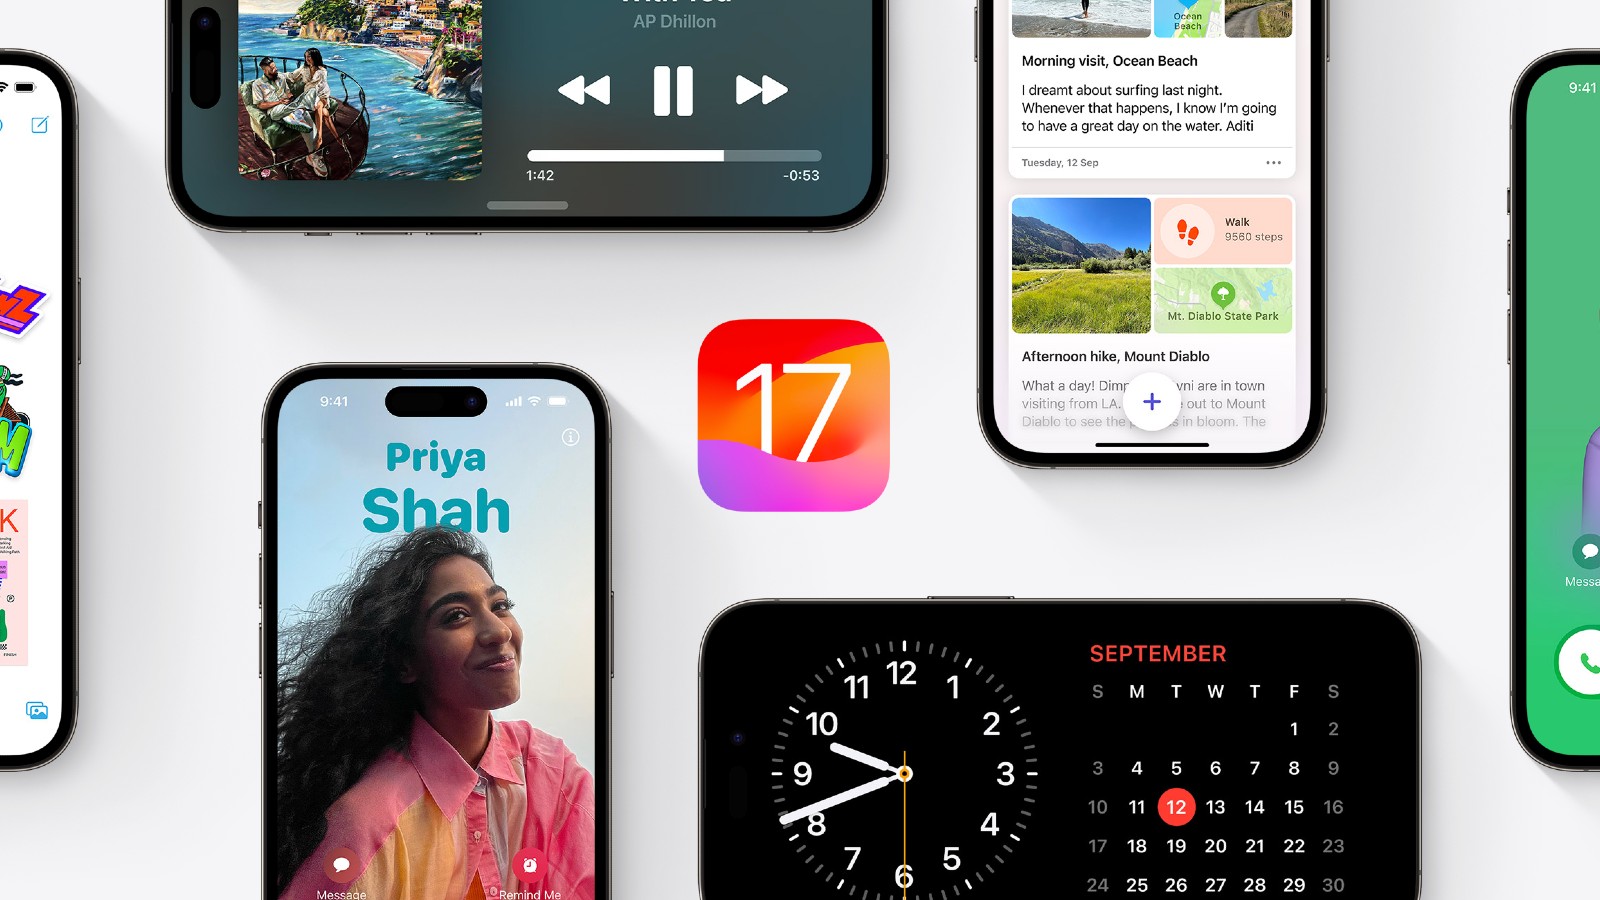 iOS 17.4: What to expect in Apple’s next major software update